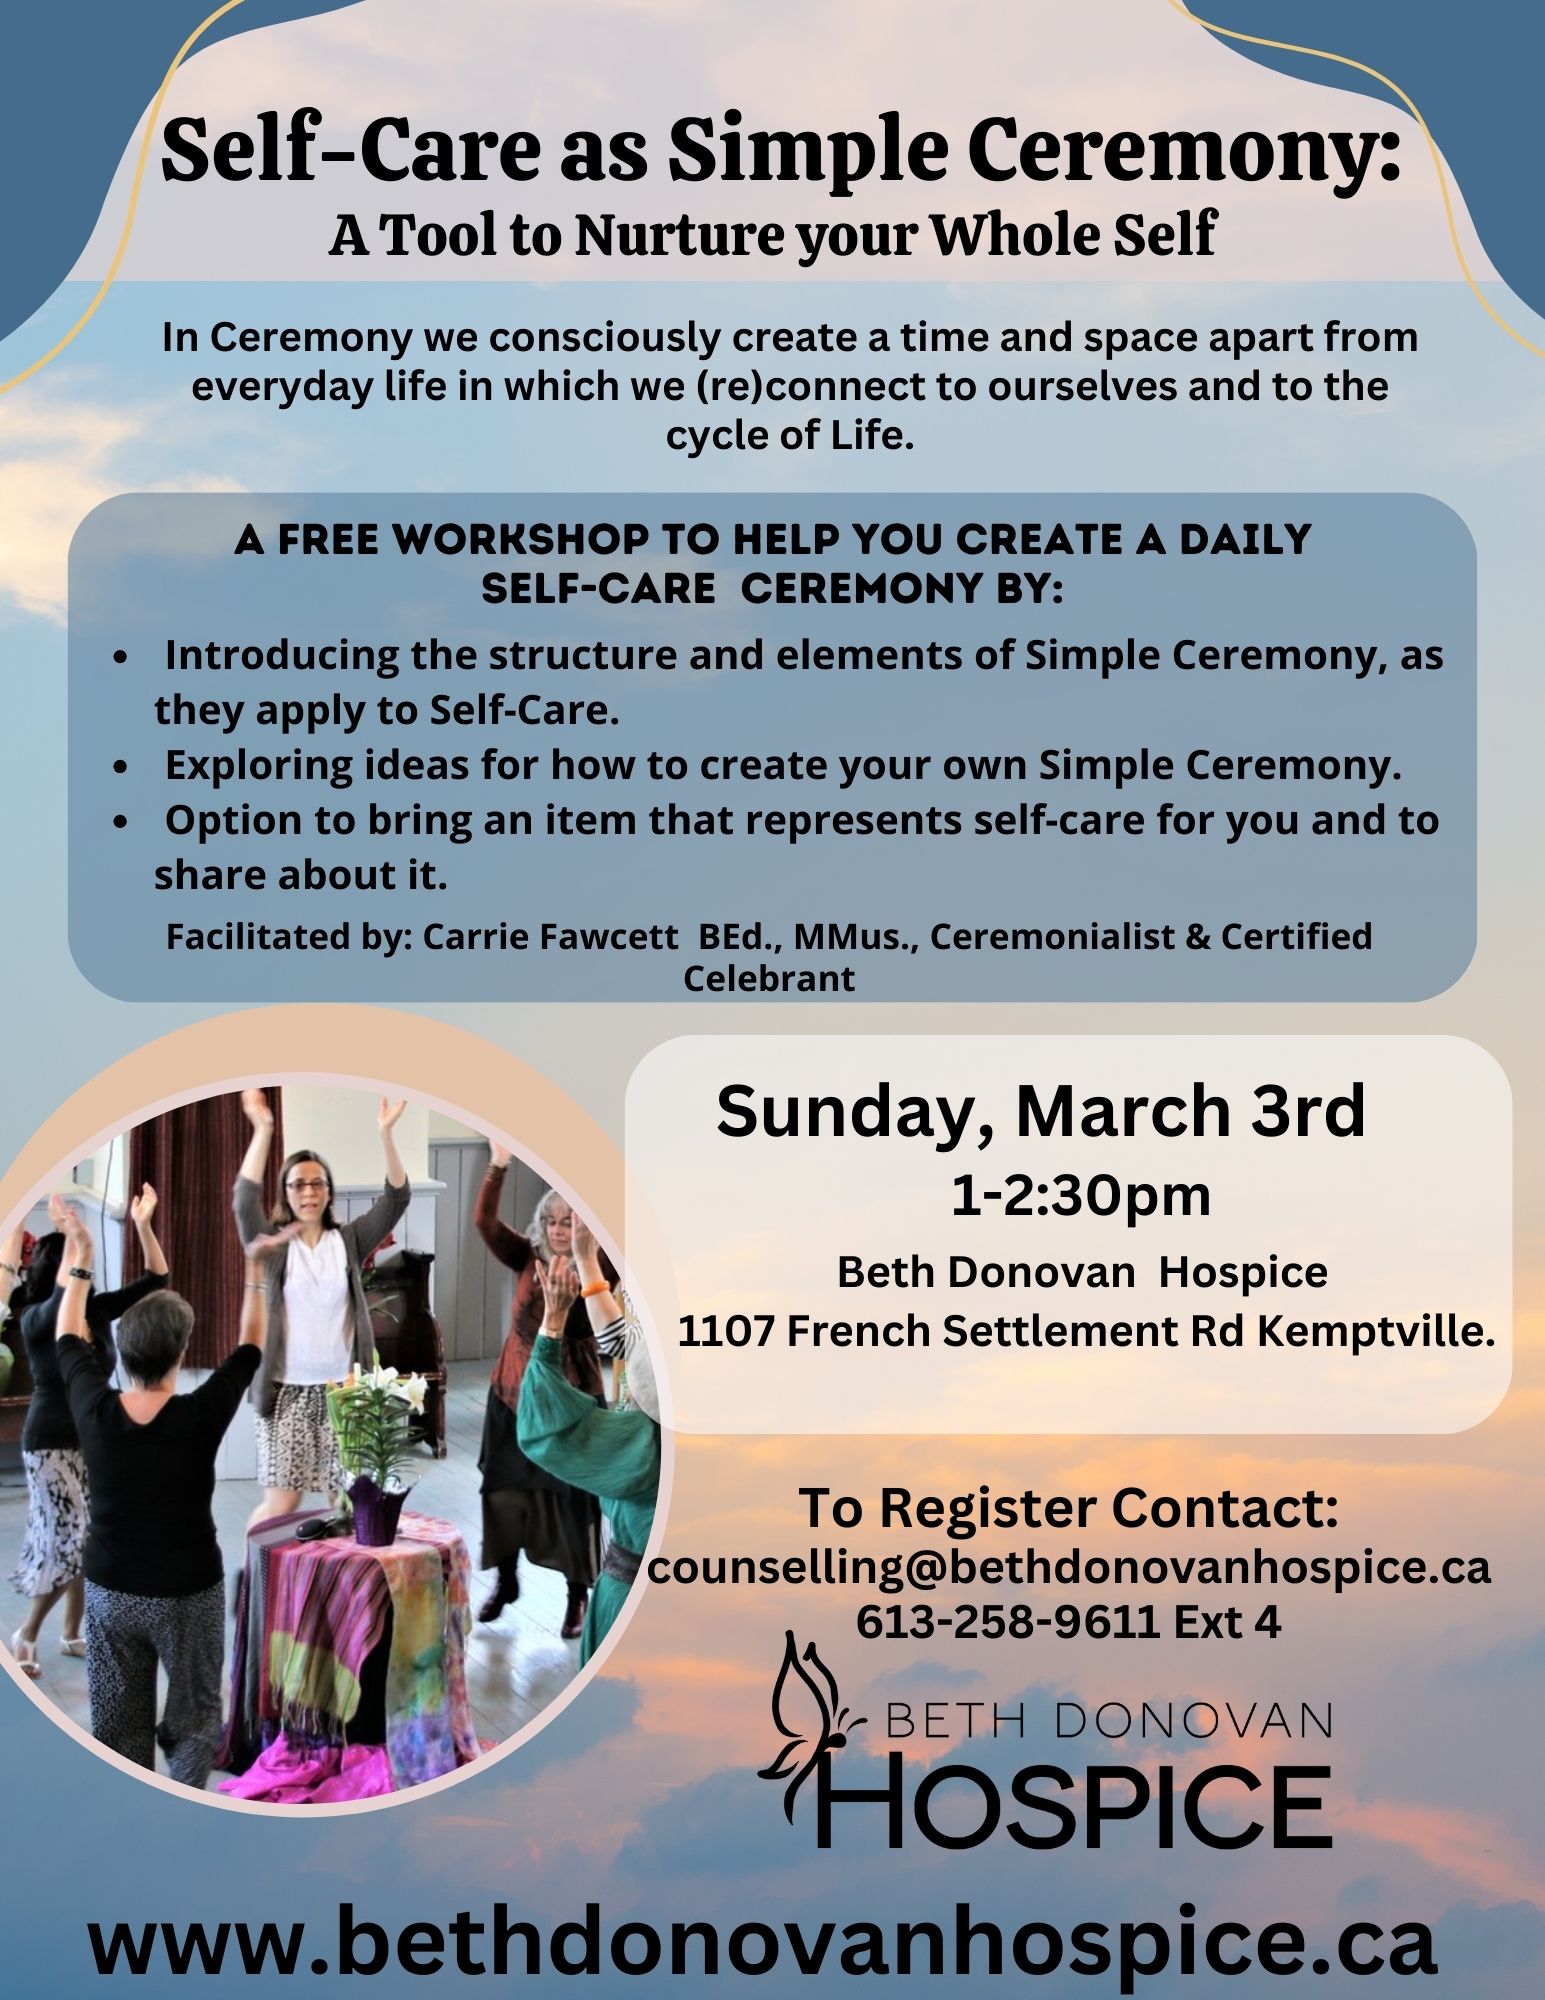 Simple Ceremony as Nourishment A Self care focus Set up a daily self care ritual as a Ceremony 1.5hrs March 3 from 1 230pm limit of 15 registrants To register counsellingbethdonovanhospice.ca or 6